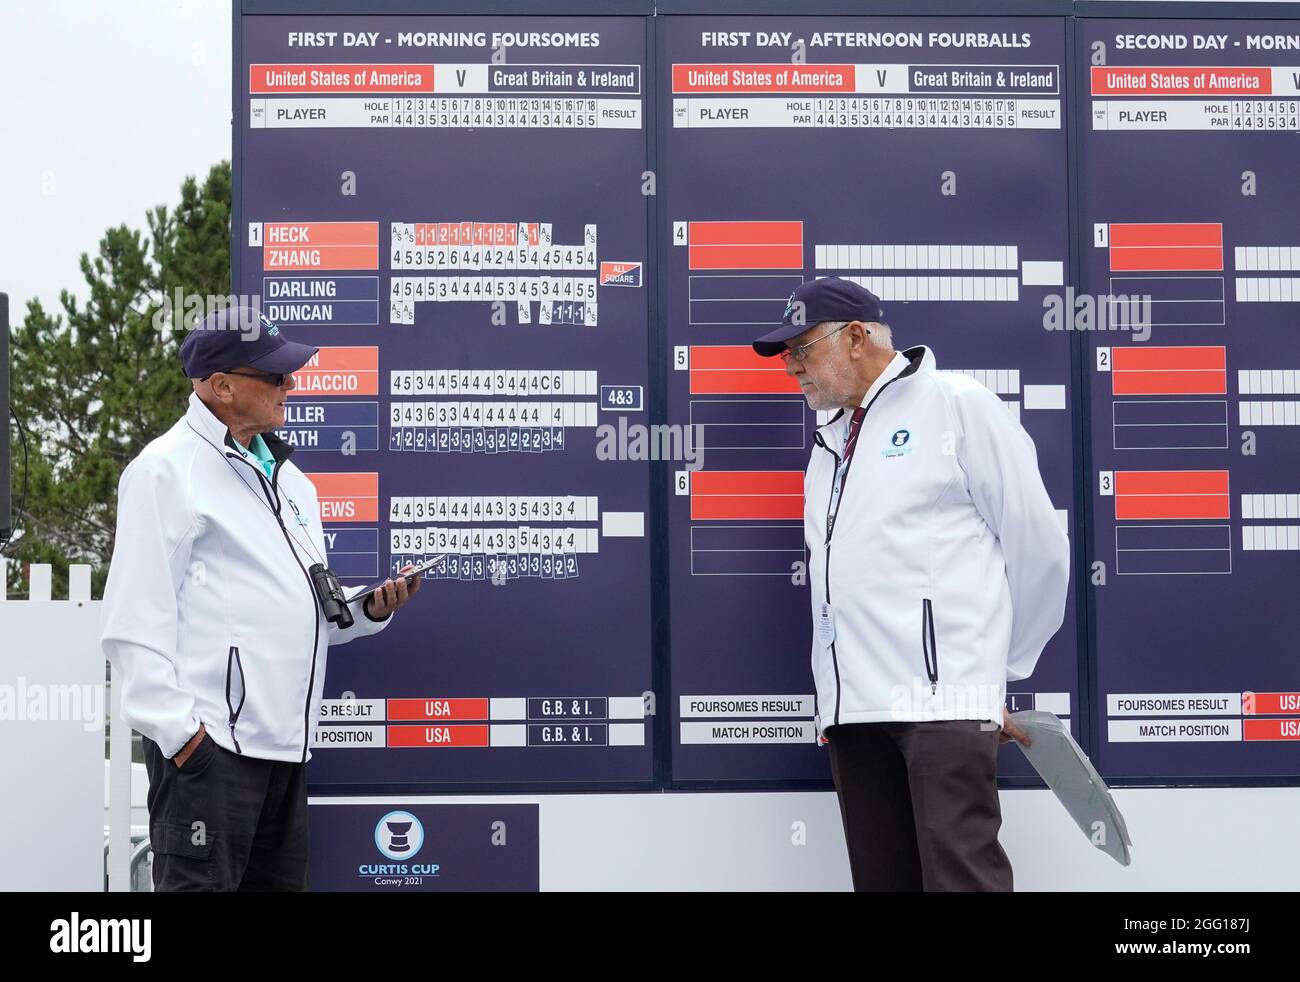 Scorers working on the main scoreboard during the 2021 Curtis Cup Day 1 - Morning Foursomes at Conwy Golf Club, Conwy, Wales on 26/8/21 . (Steve Flynn Stock Photo